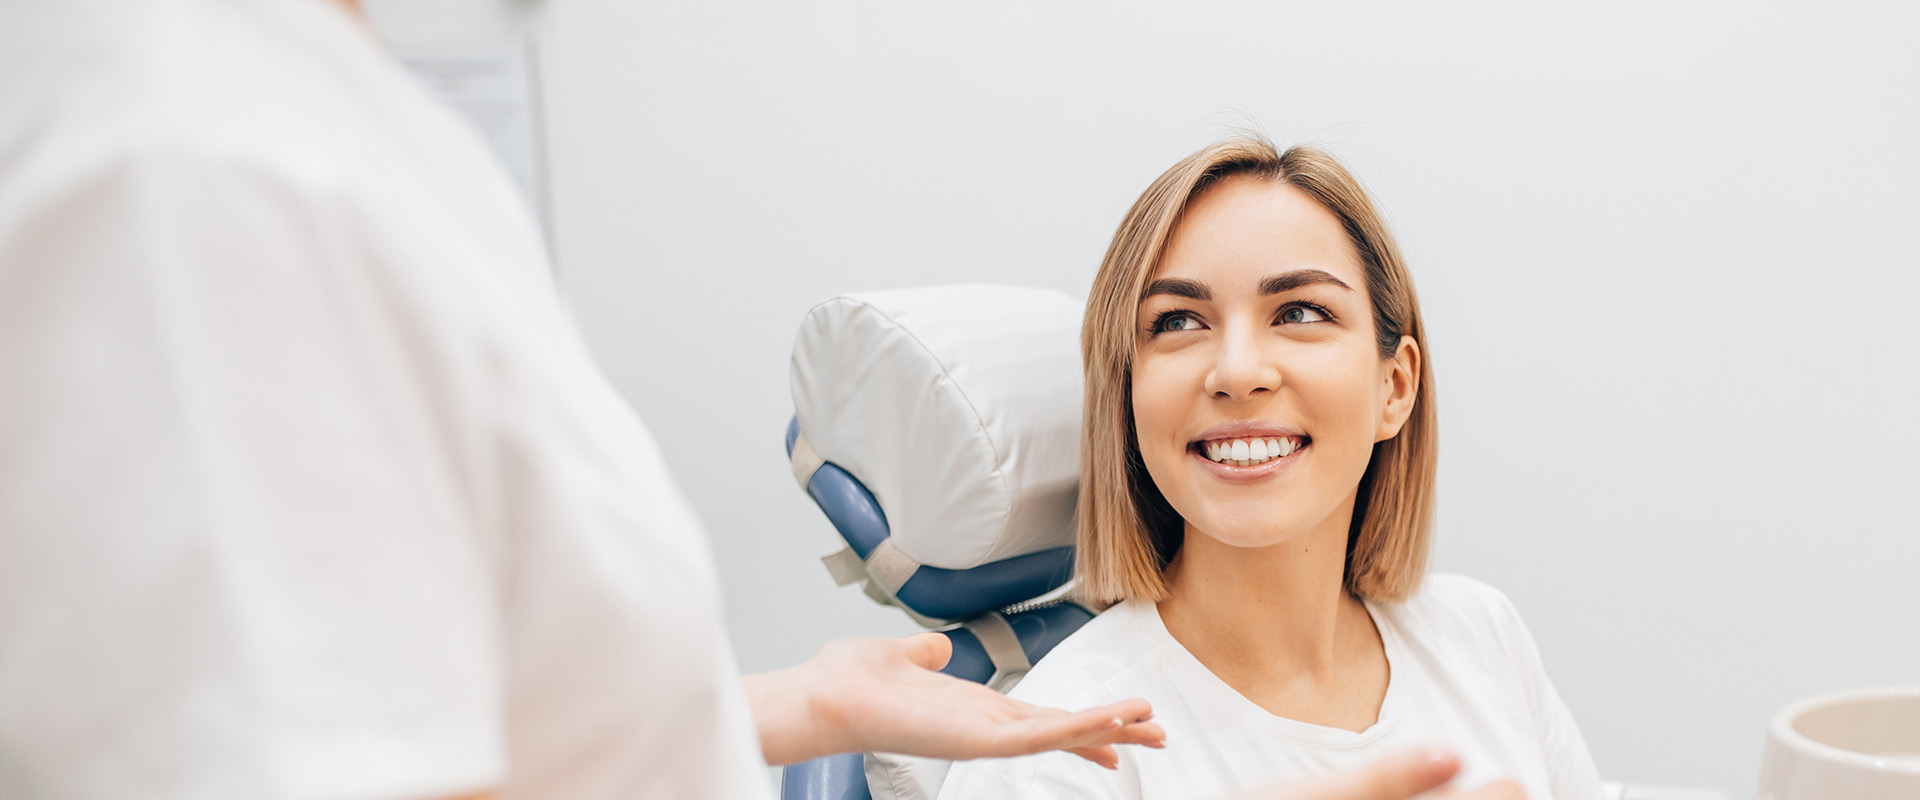 Granger Dentistry | TMJ Disorders, Emergency Treatment and Oral Cancer Screening